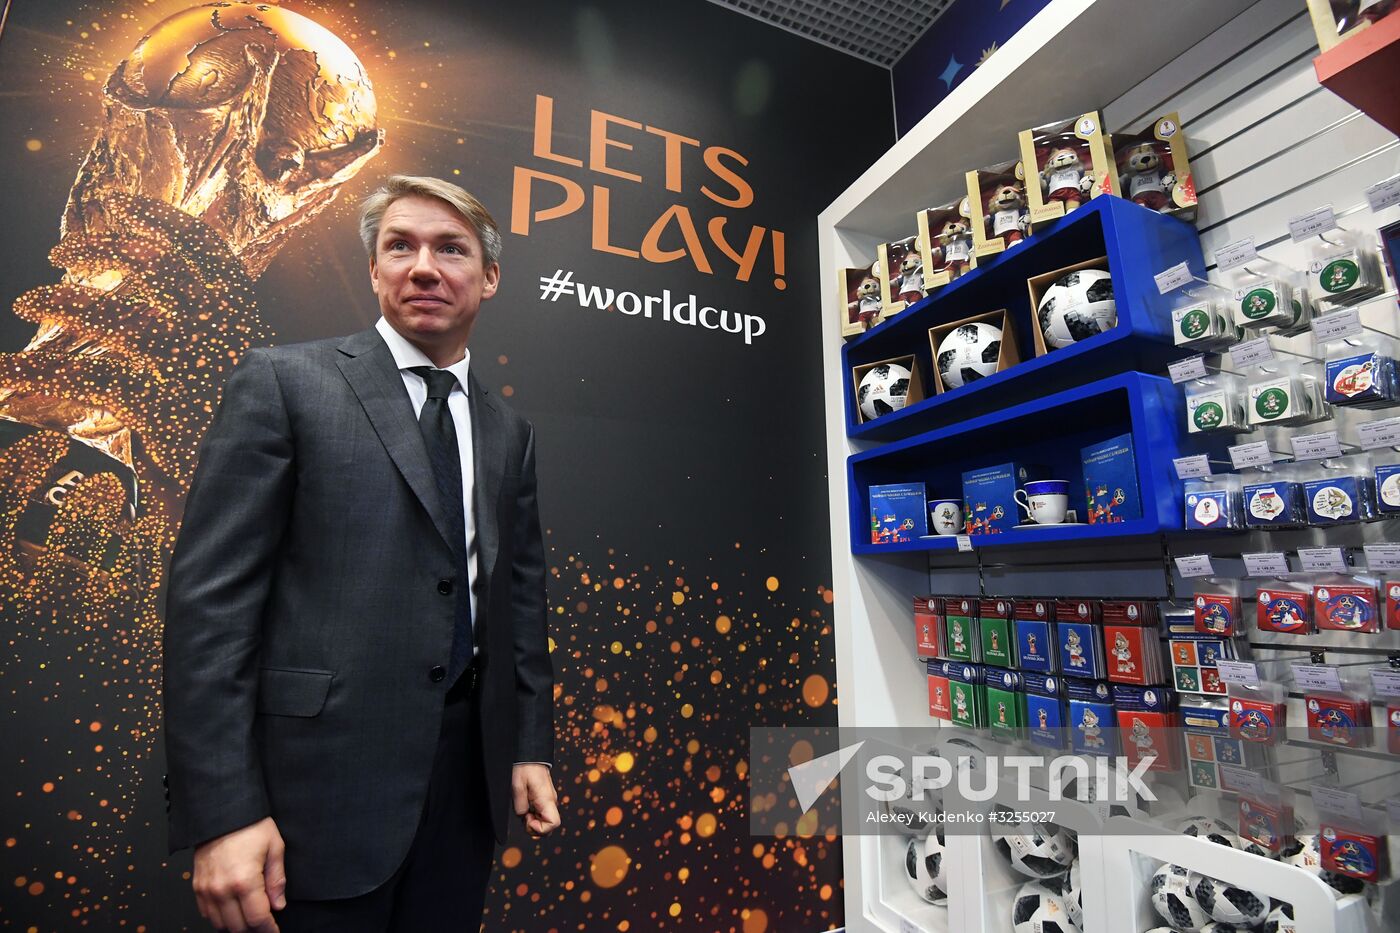 Official 2018 FIFA World Cup souvenirs store opens in Moscow